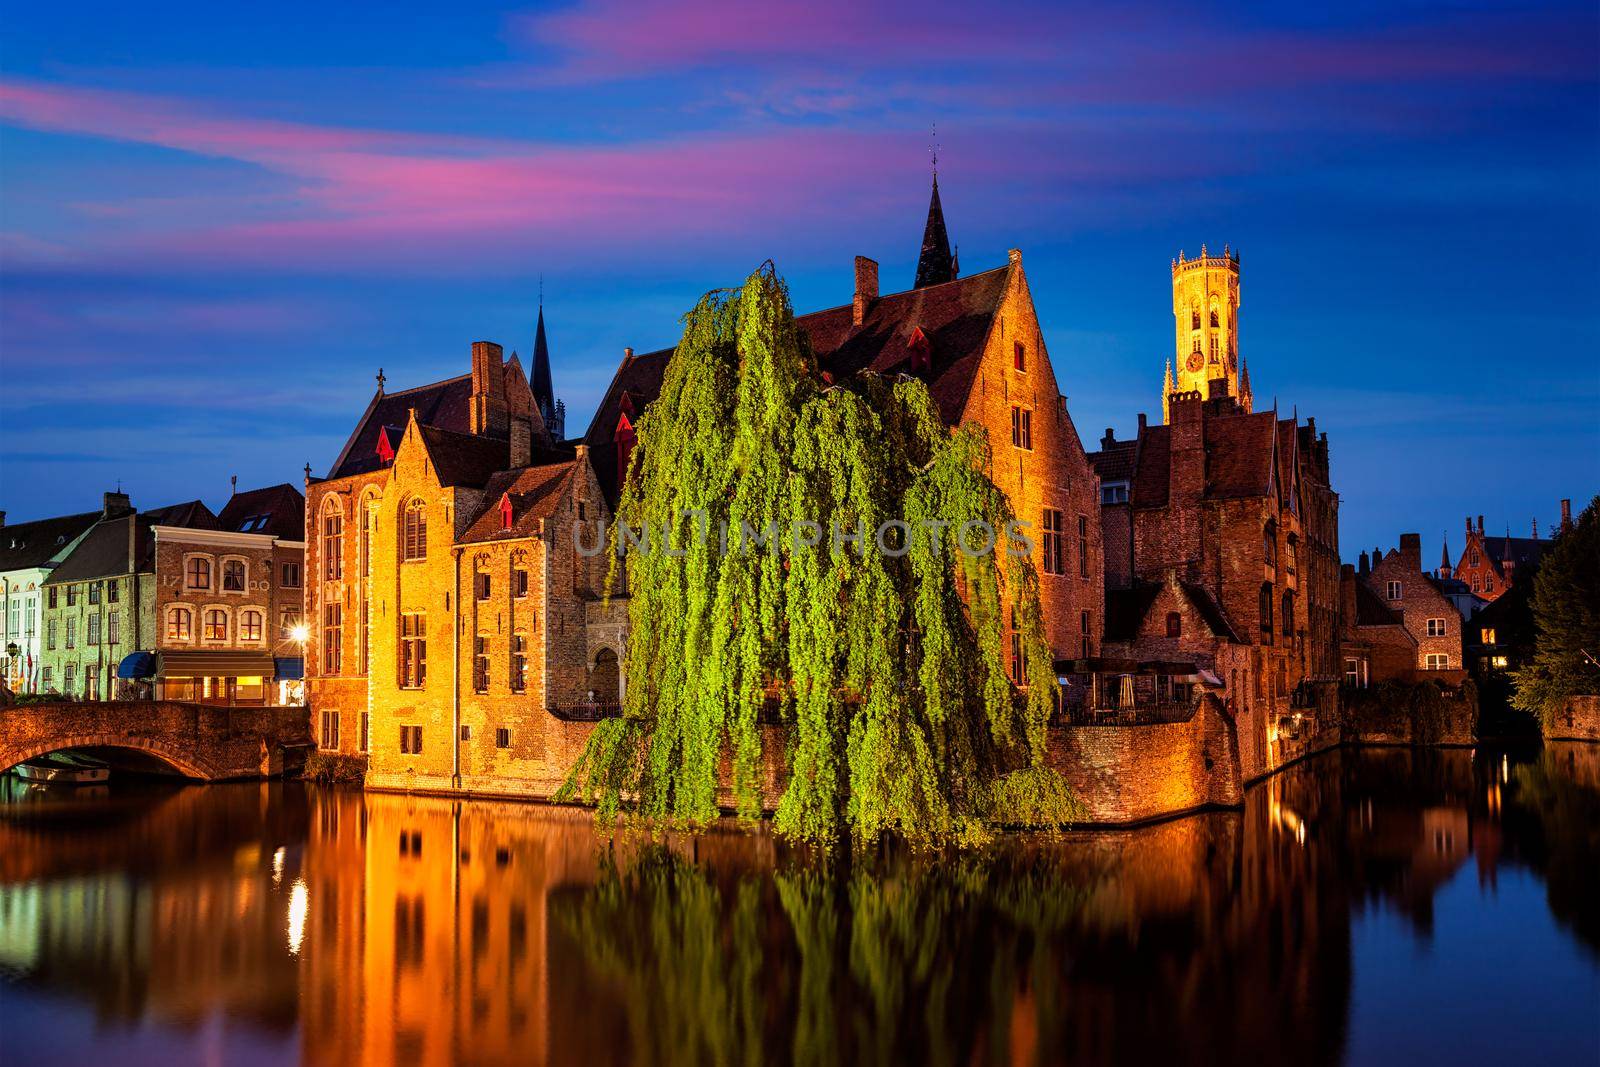 Famous view of Bruges - Rozenhoedkaai with Belfry and old houses along canal with tree in the night. Brugge, Belgium